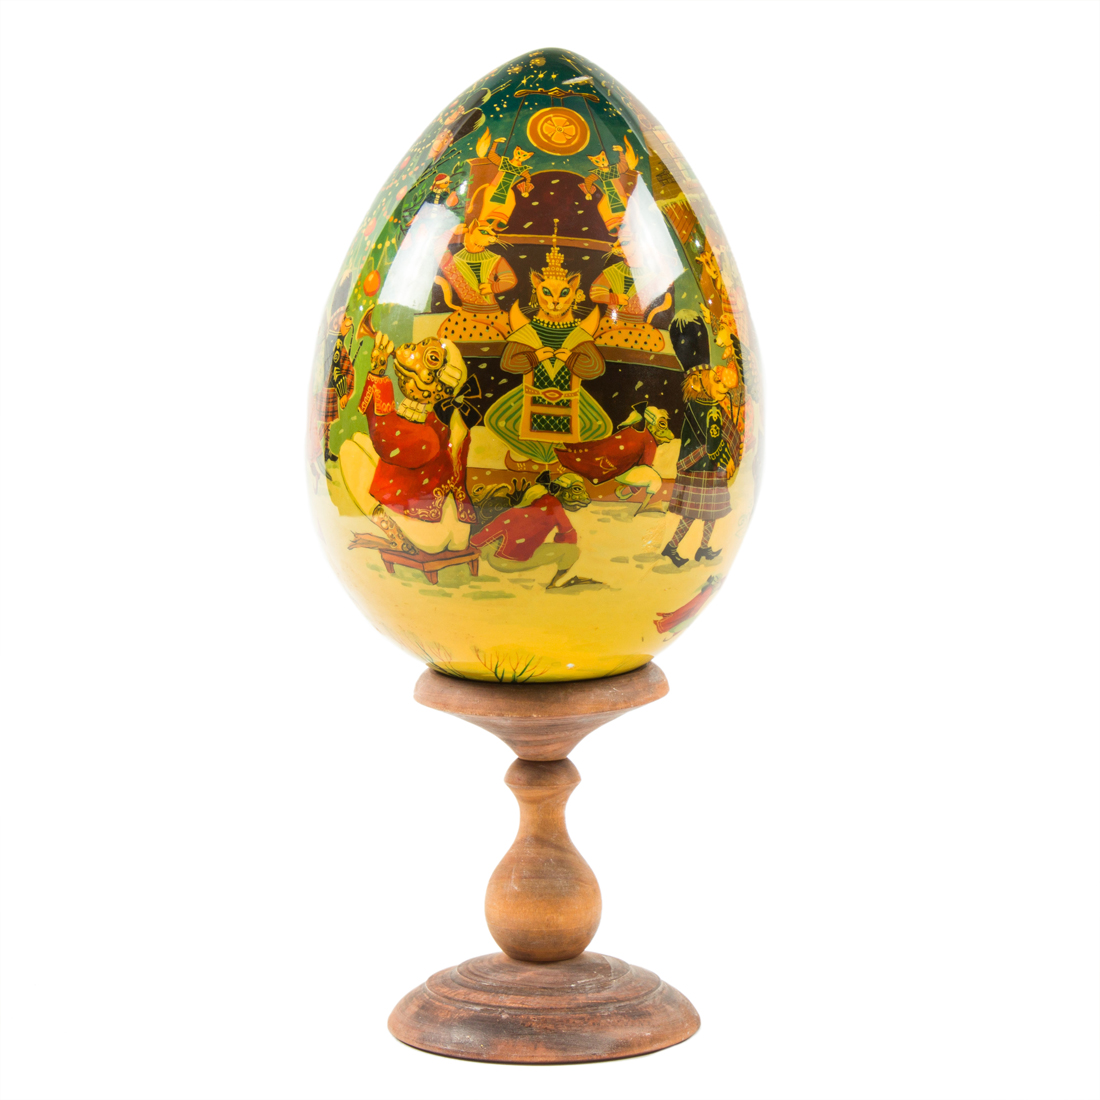 A RUSSIAN LACQUER EGG DEPICTING